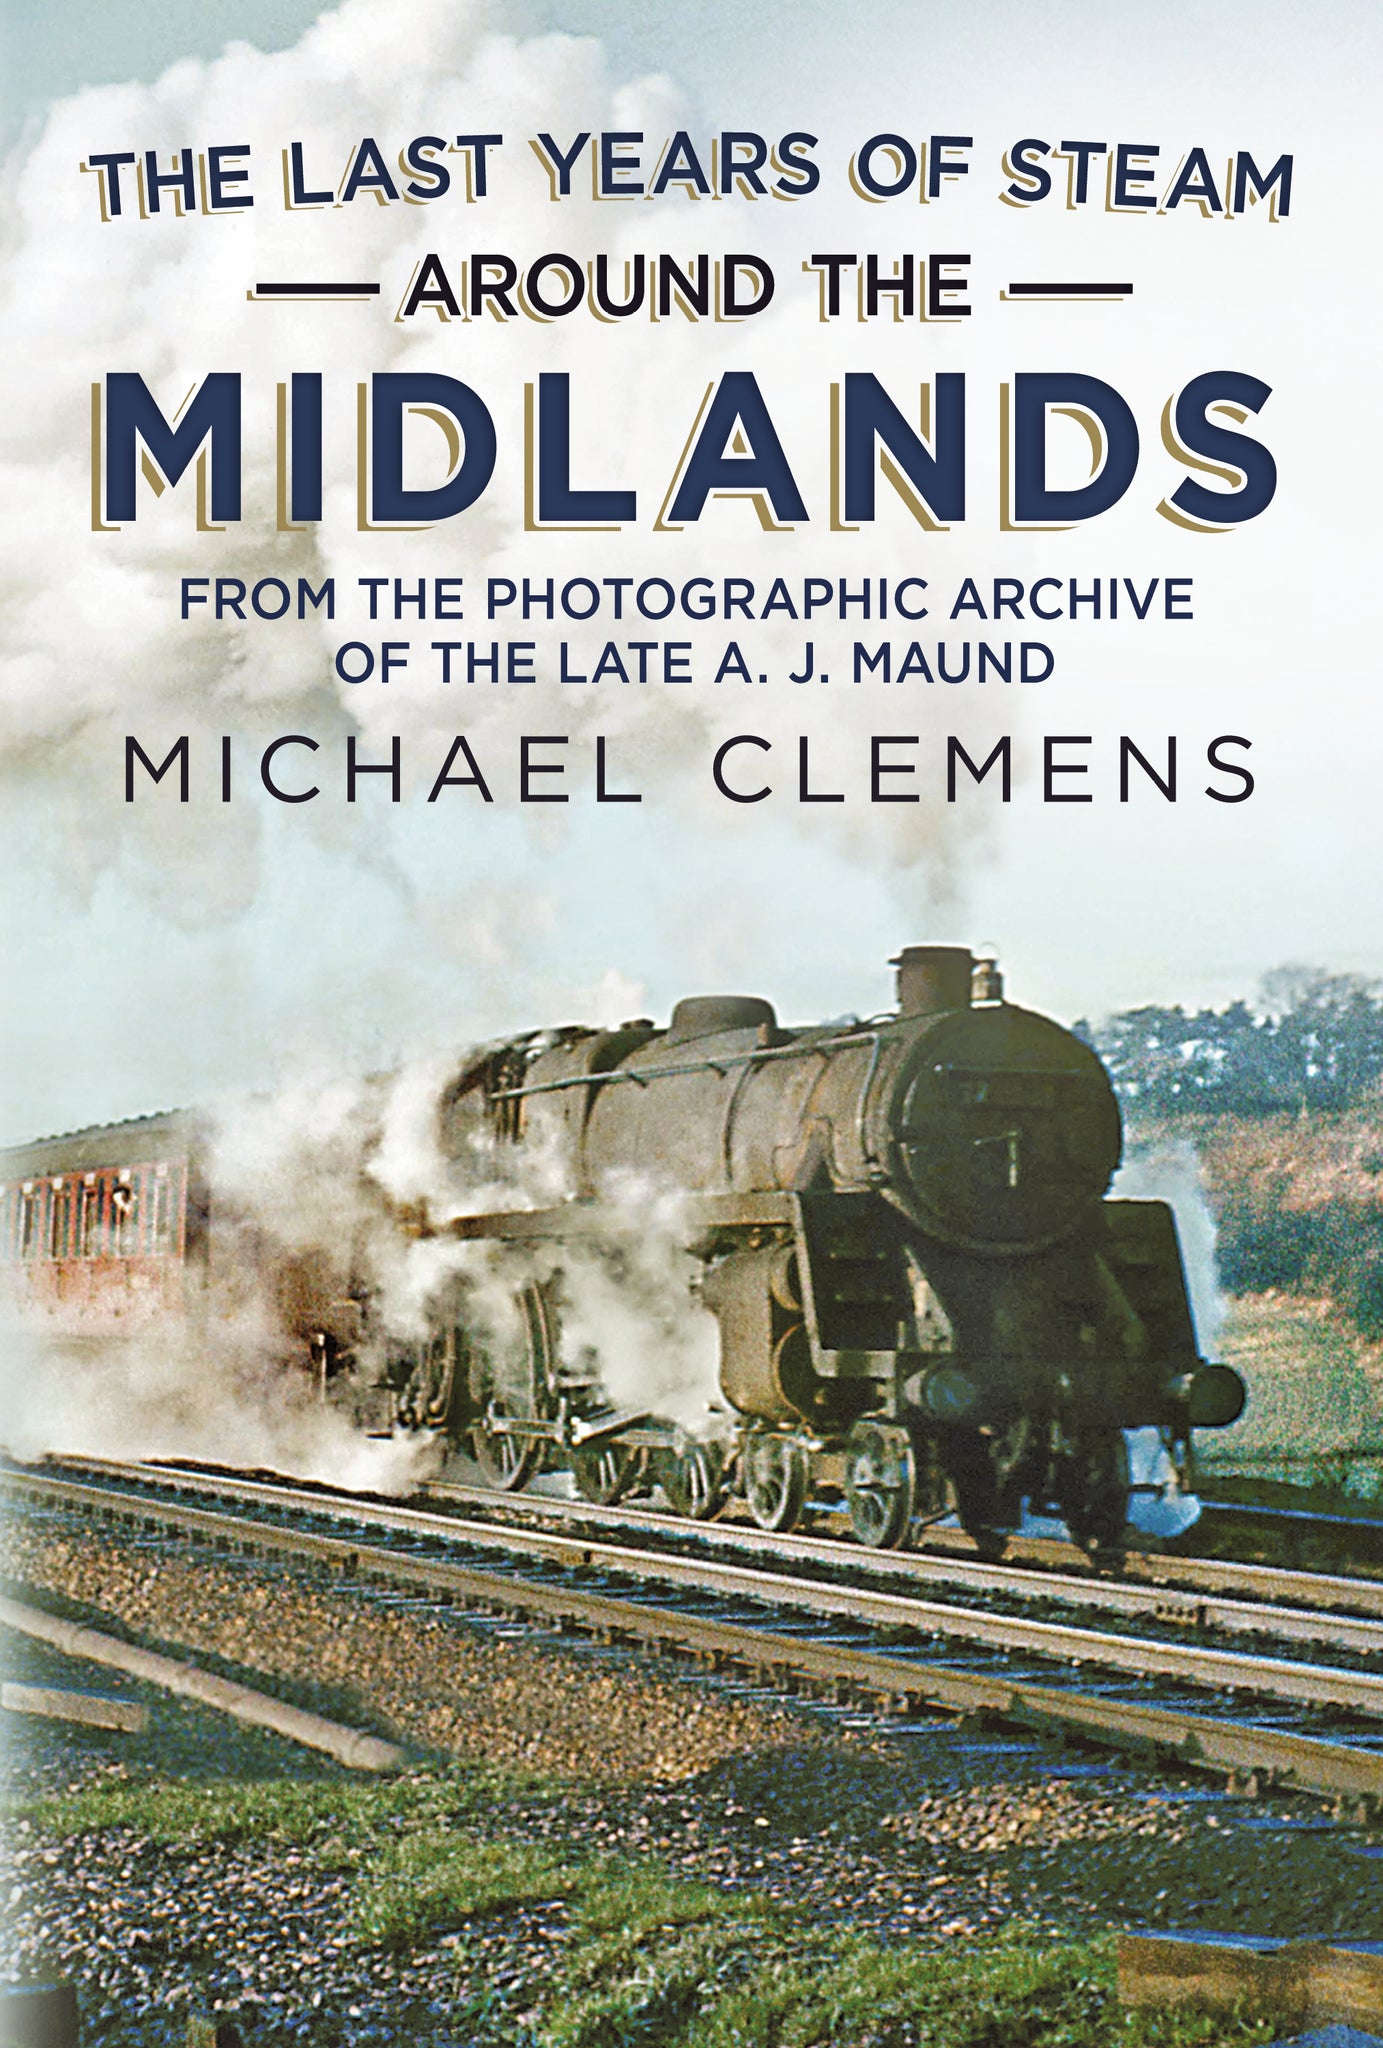 The Last Years of Steam Around the Midlands: From the Photographic Archive of the Late A. J. Maund (hardback edition)